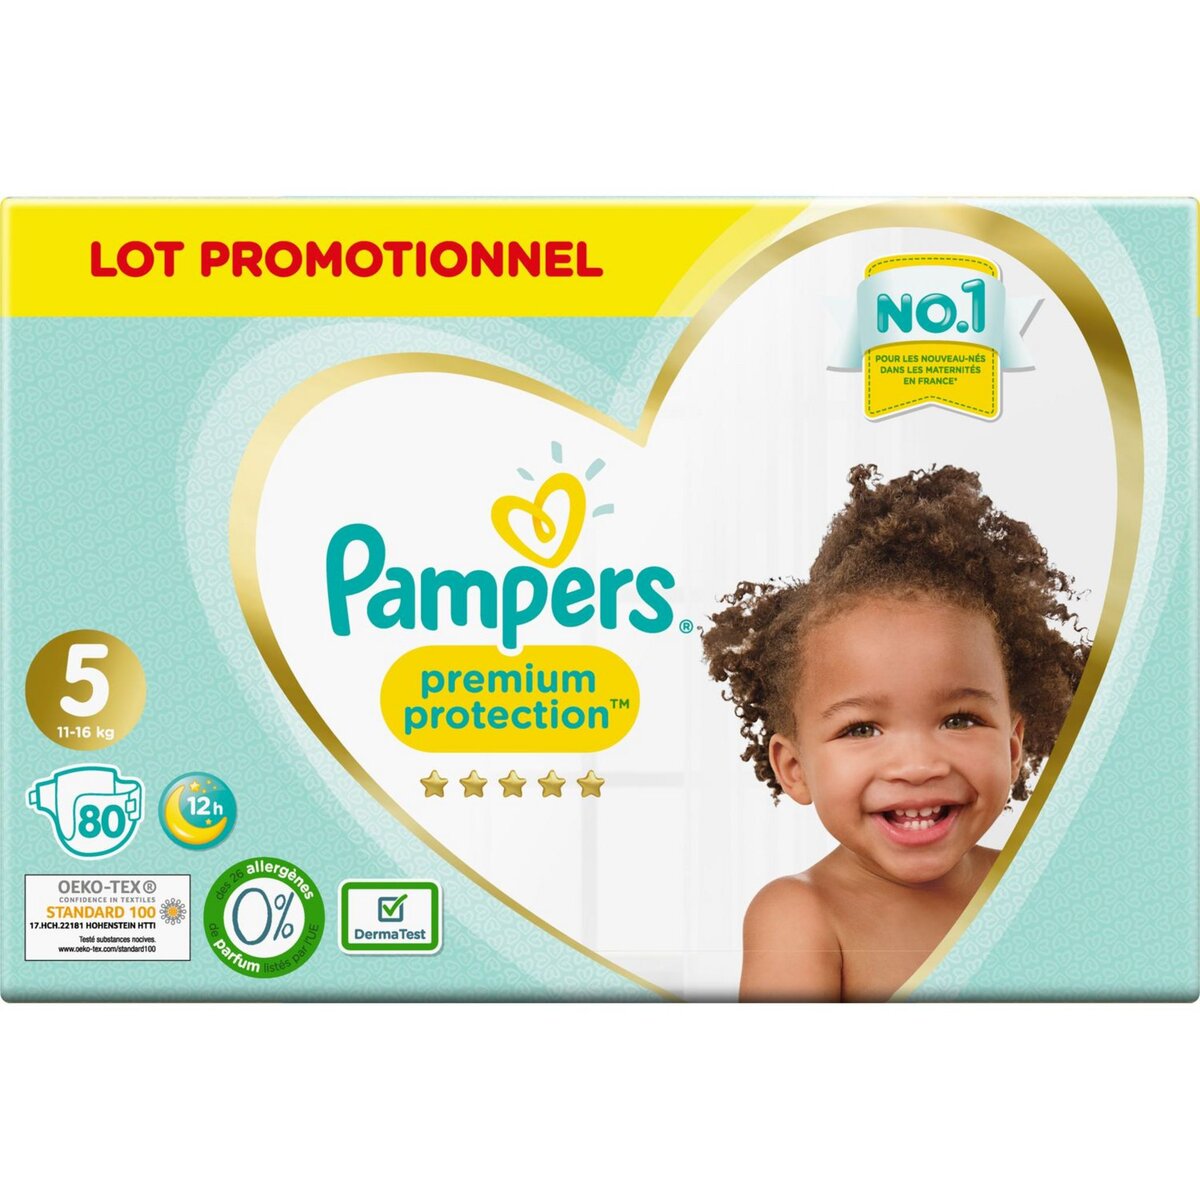 PAMPERS Premium protection pants couches-culottes taille 5 lot promo 80 couches